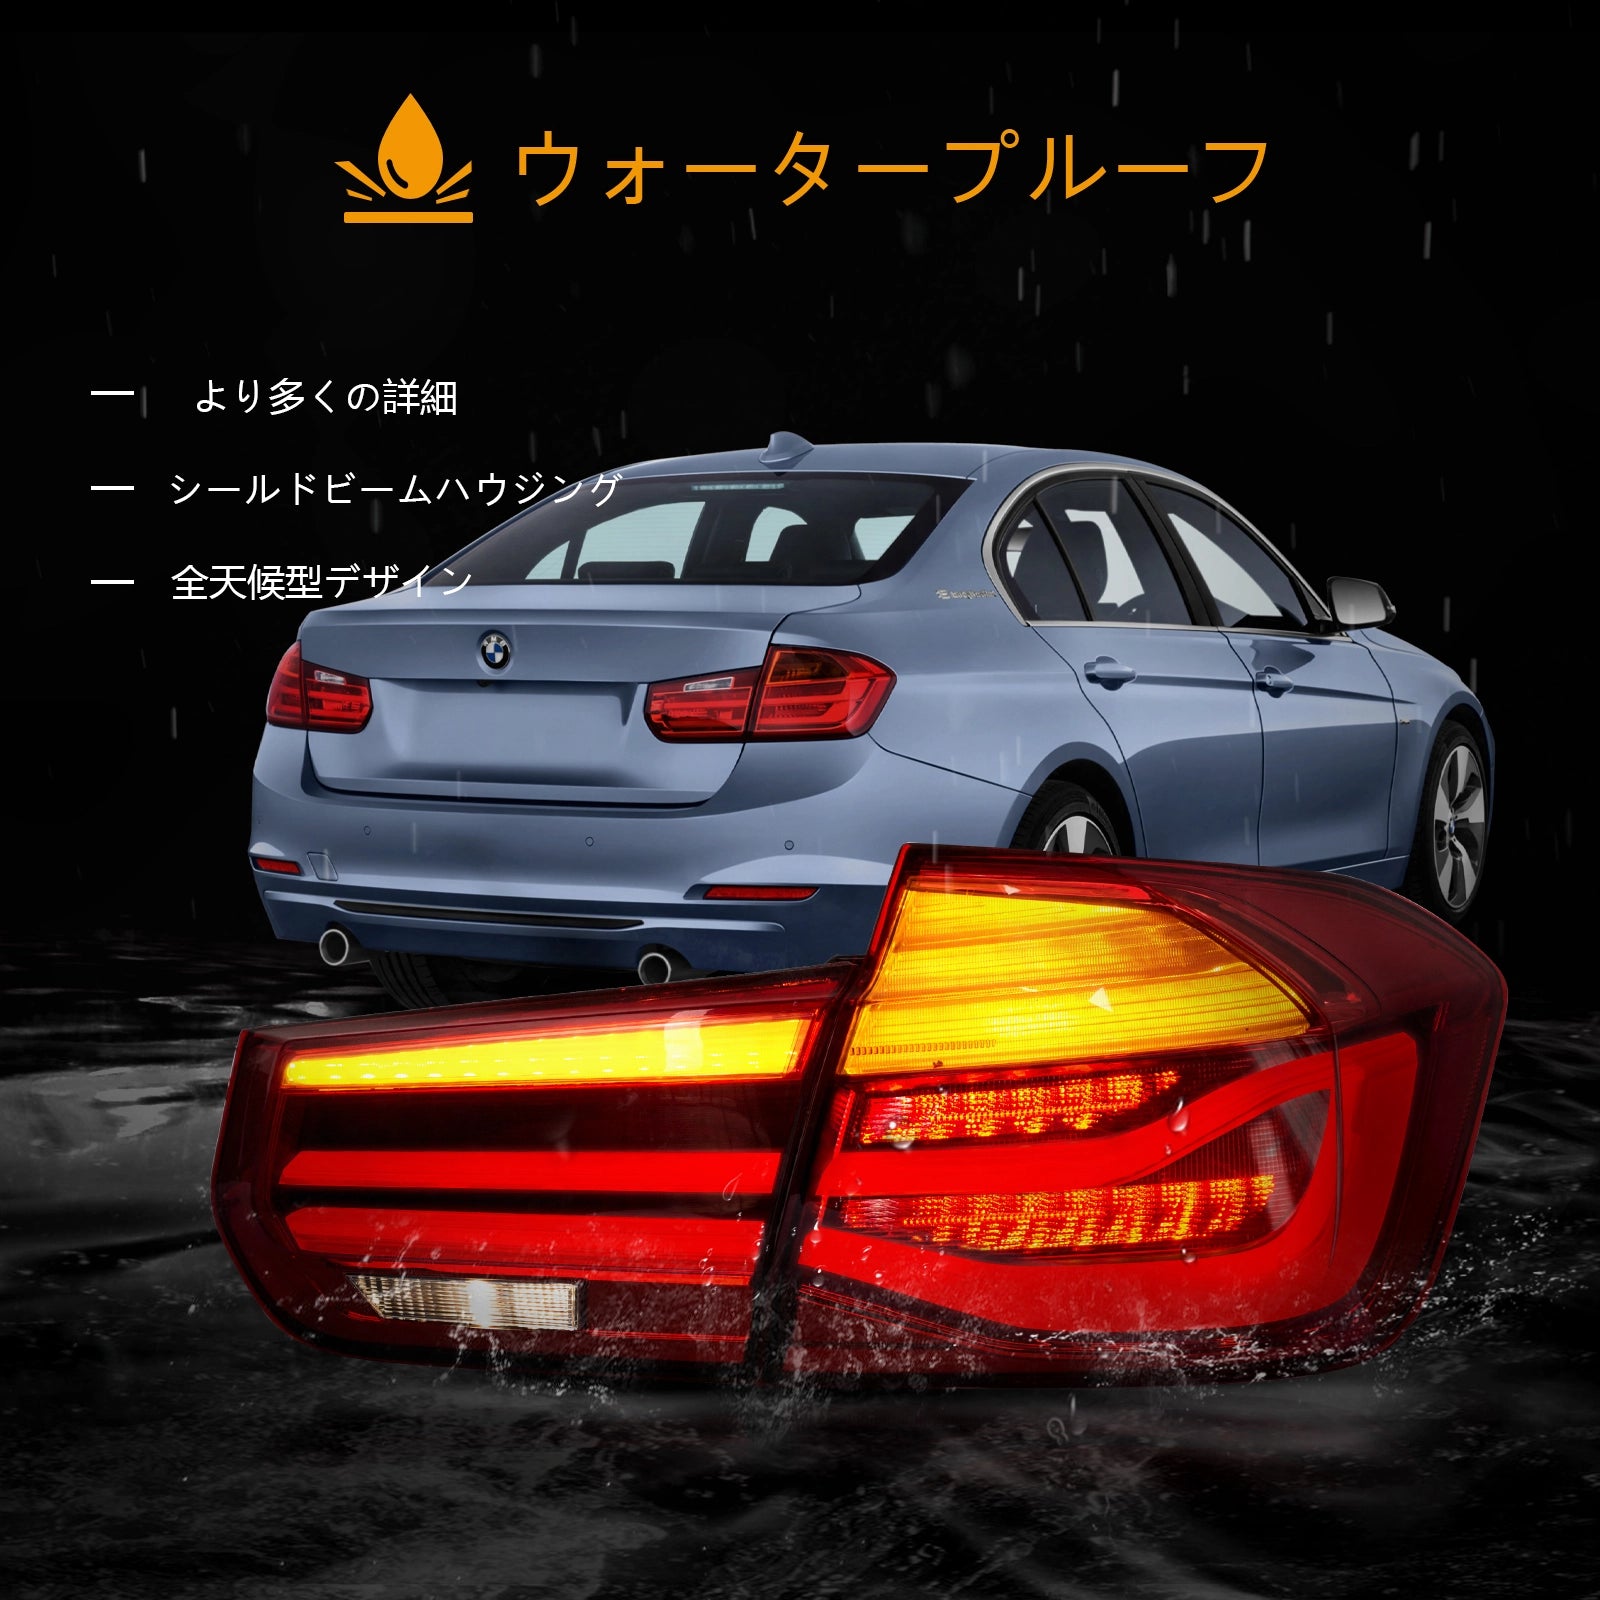 12-18 BMW 3 Series 6th Gen (F30 F35 F80) Vland LED Tail Lights with Sequential Amber Turn Signals